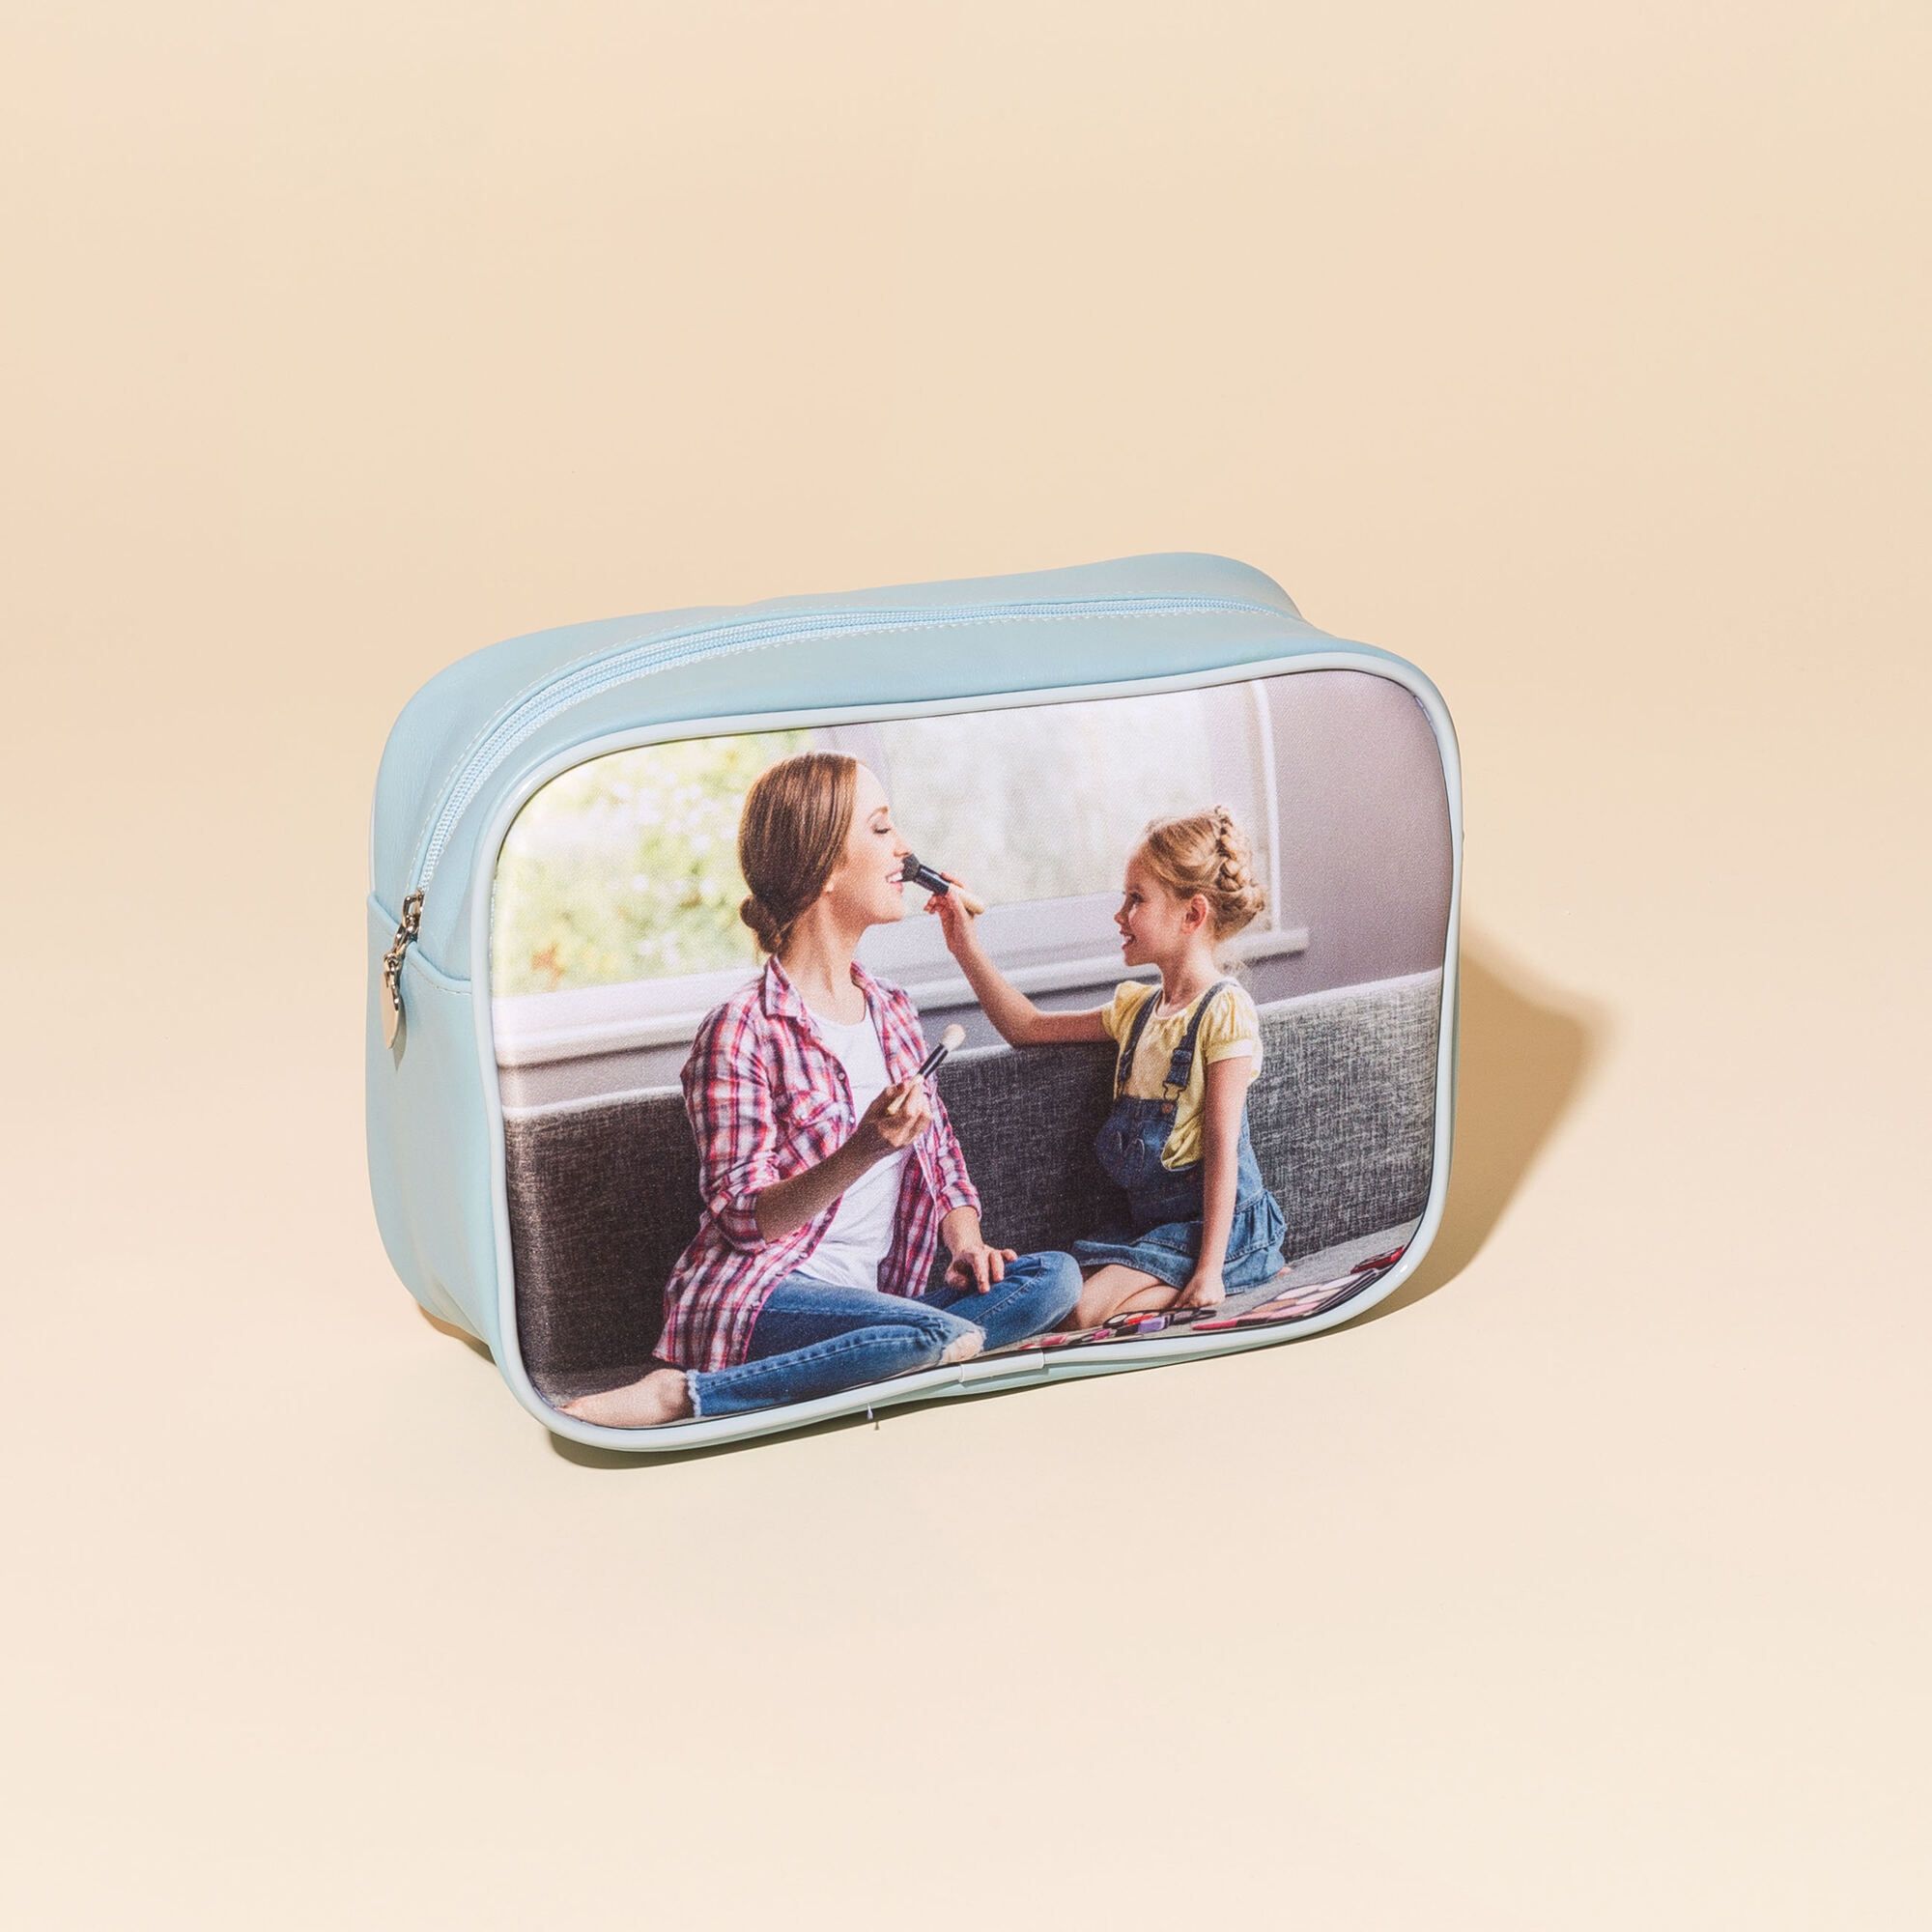 Personalized makeup bags